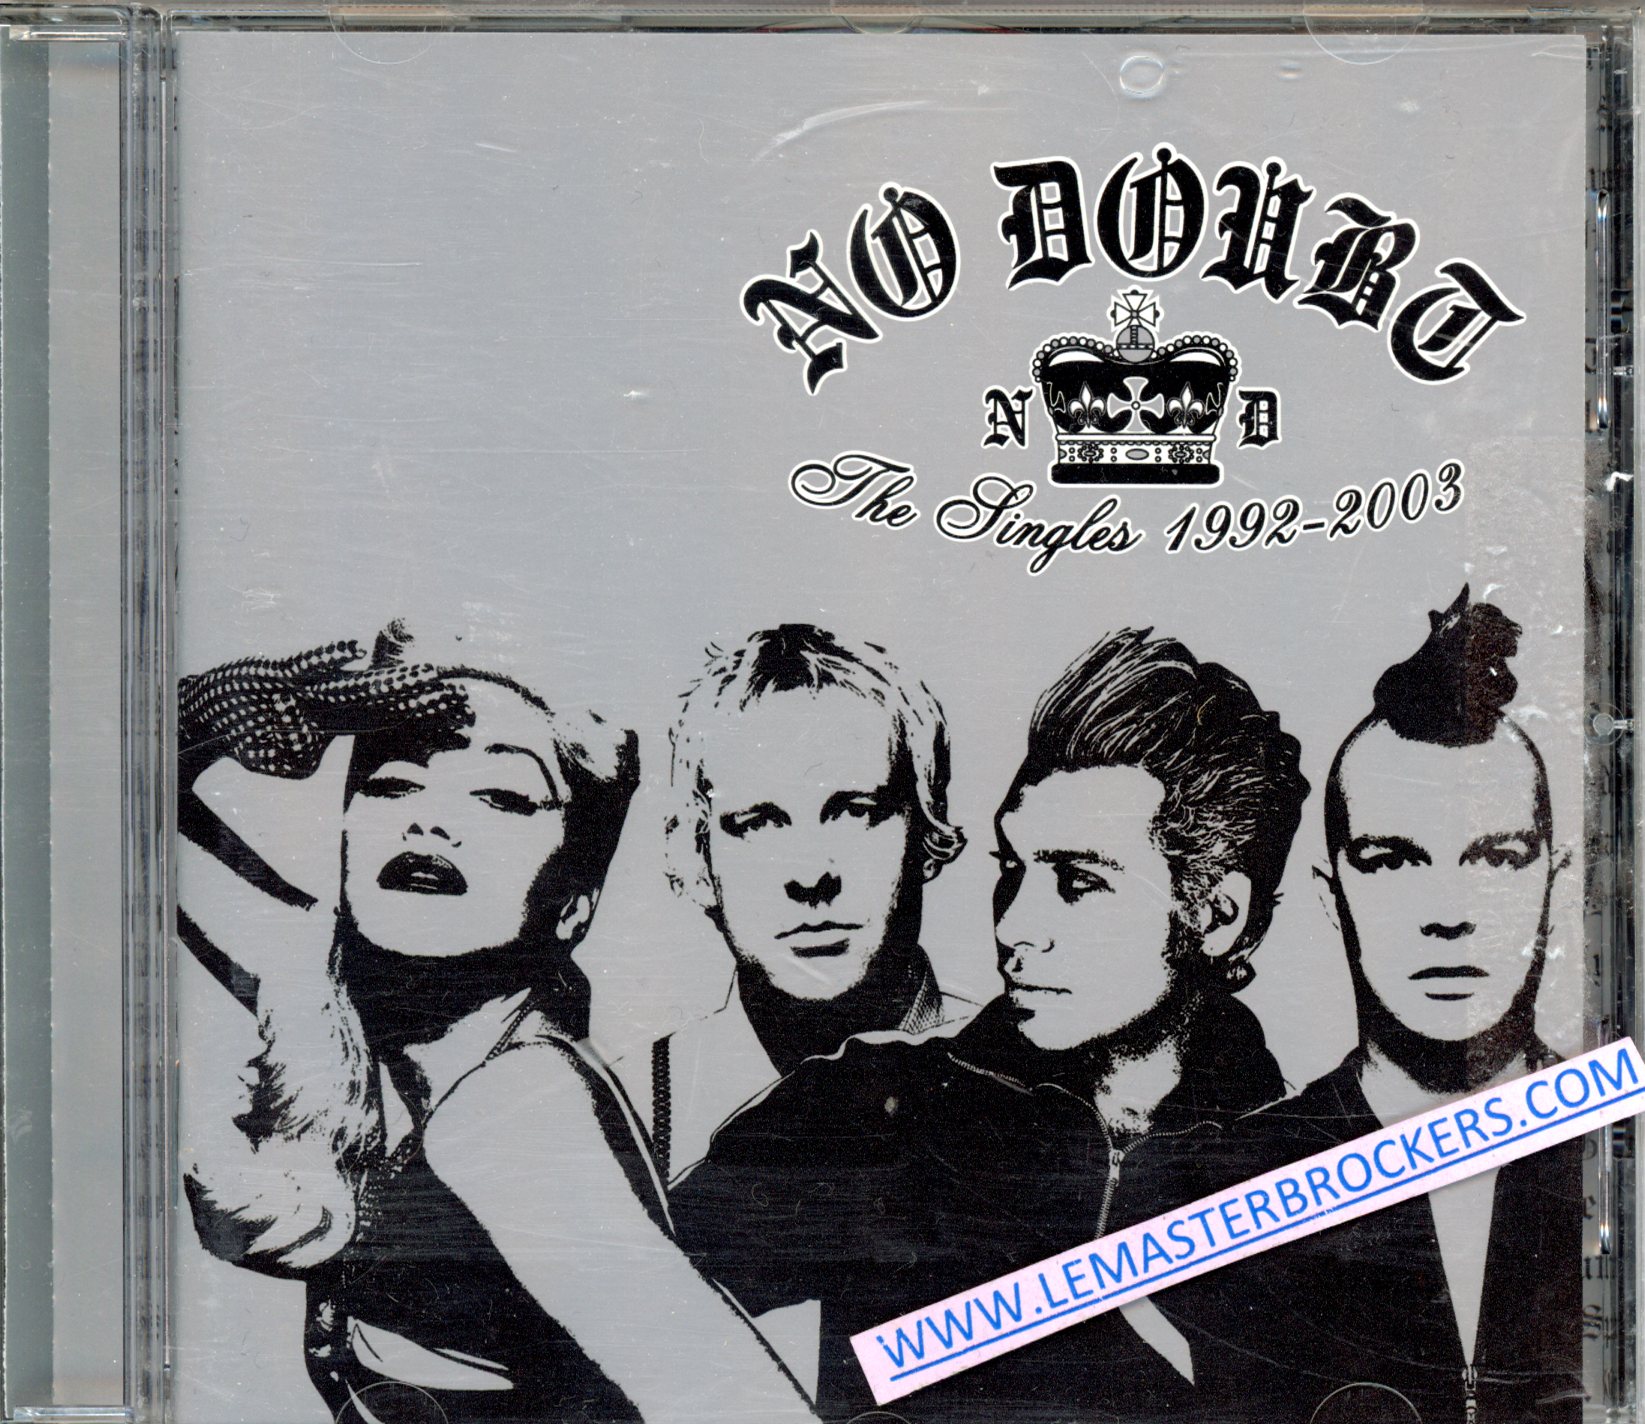 THE SINGLES NO DOUBT 1992-2003 - 602498613818